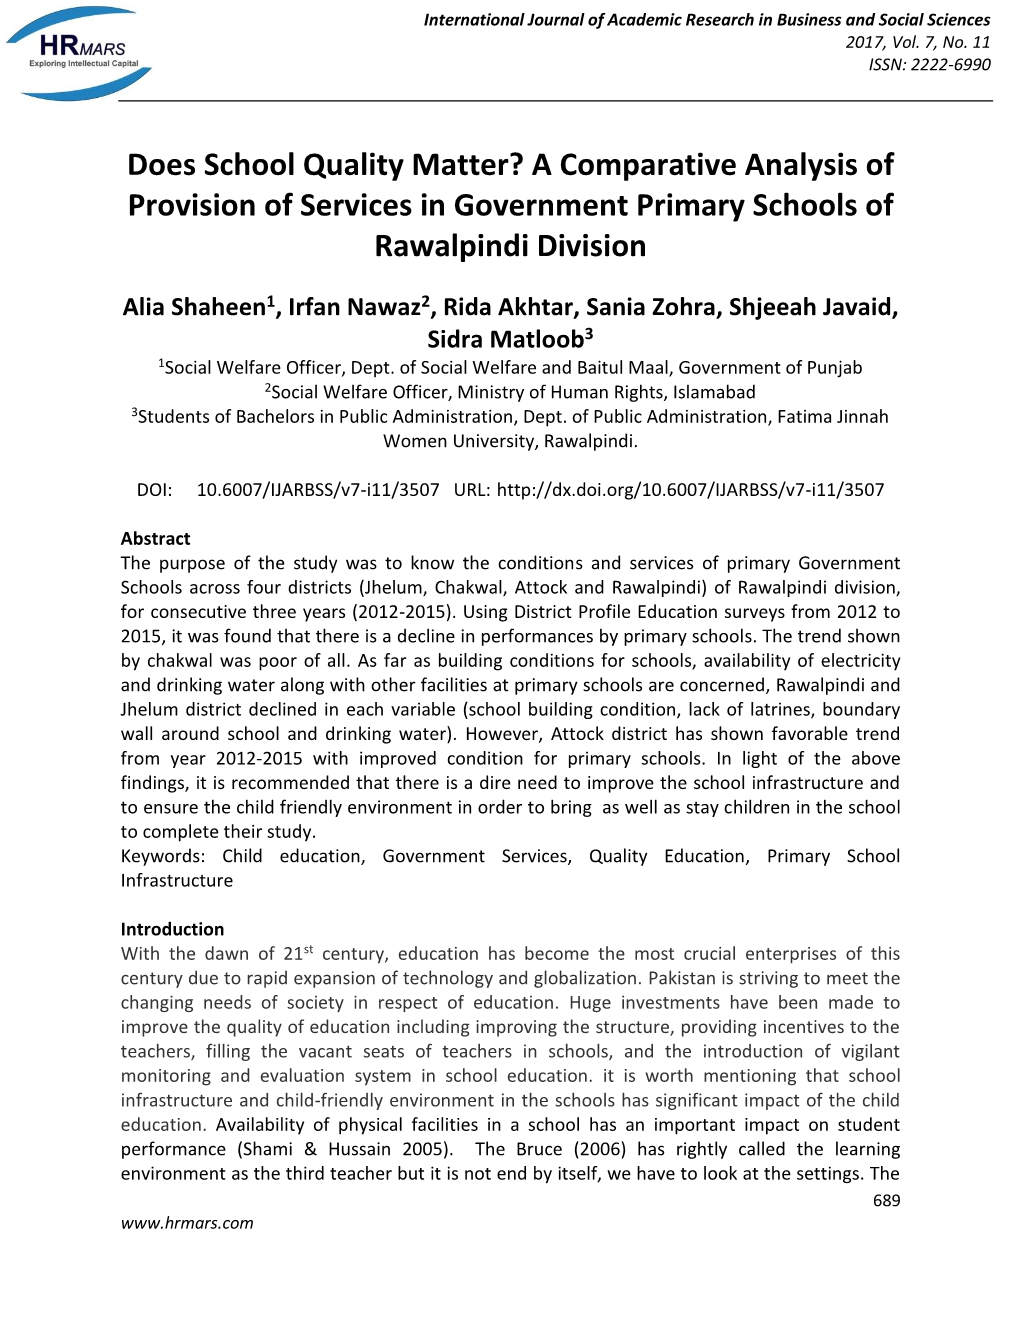 Does School Quality Matter? a Comparative Analysis of Provision of Services in Government Primary Schools of Rawalpindi Division